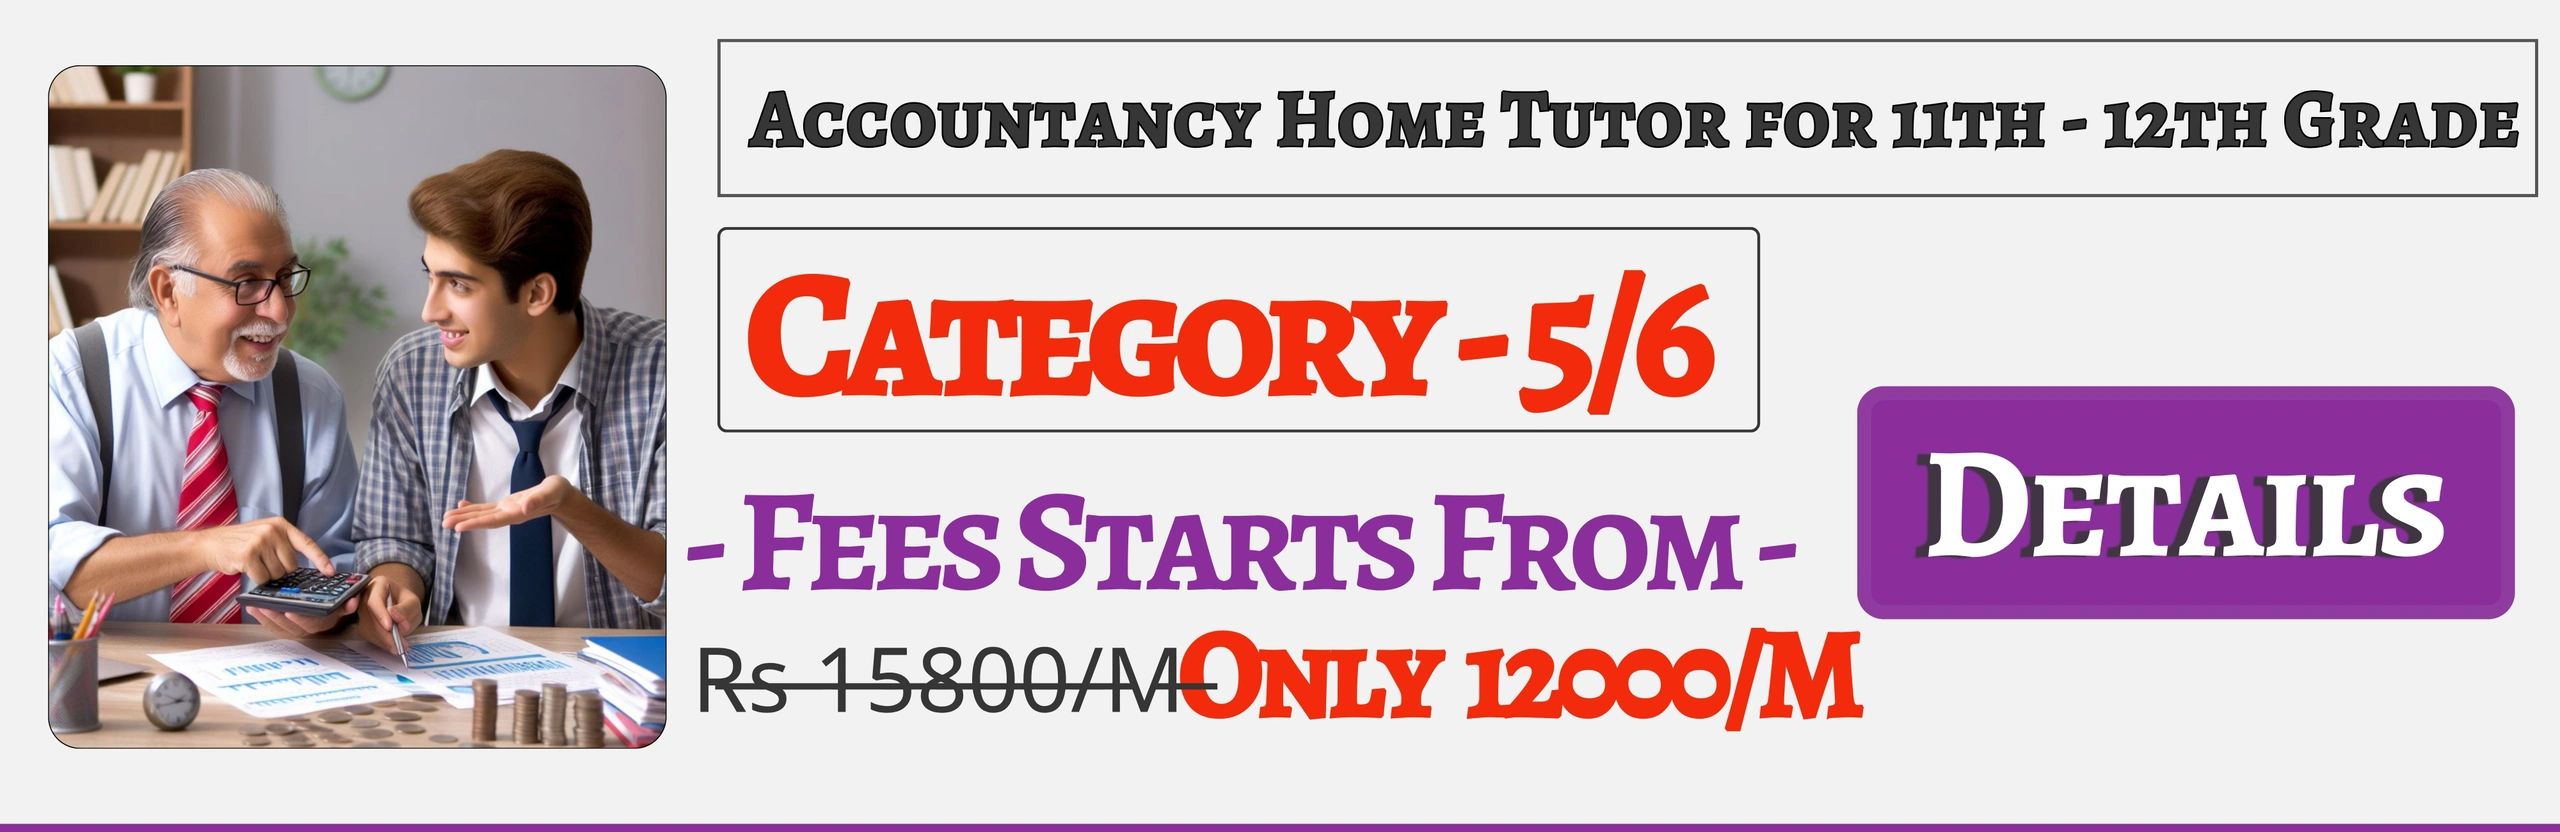 Book Best Nearby Accountancy Home Tuition Tutors For 11th & 12th Jaipur ,Fees Only 12000/M